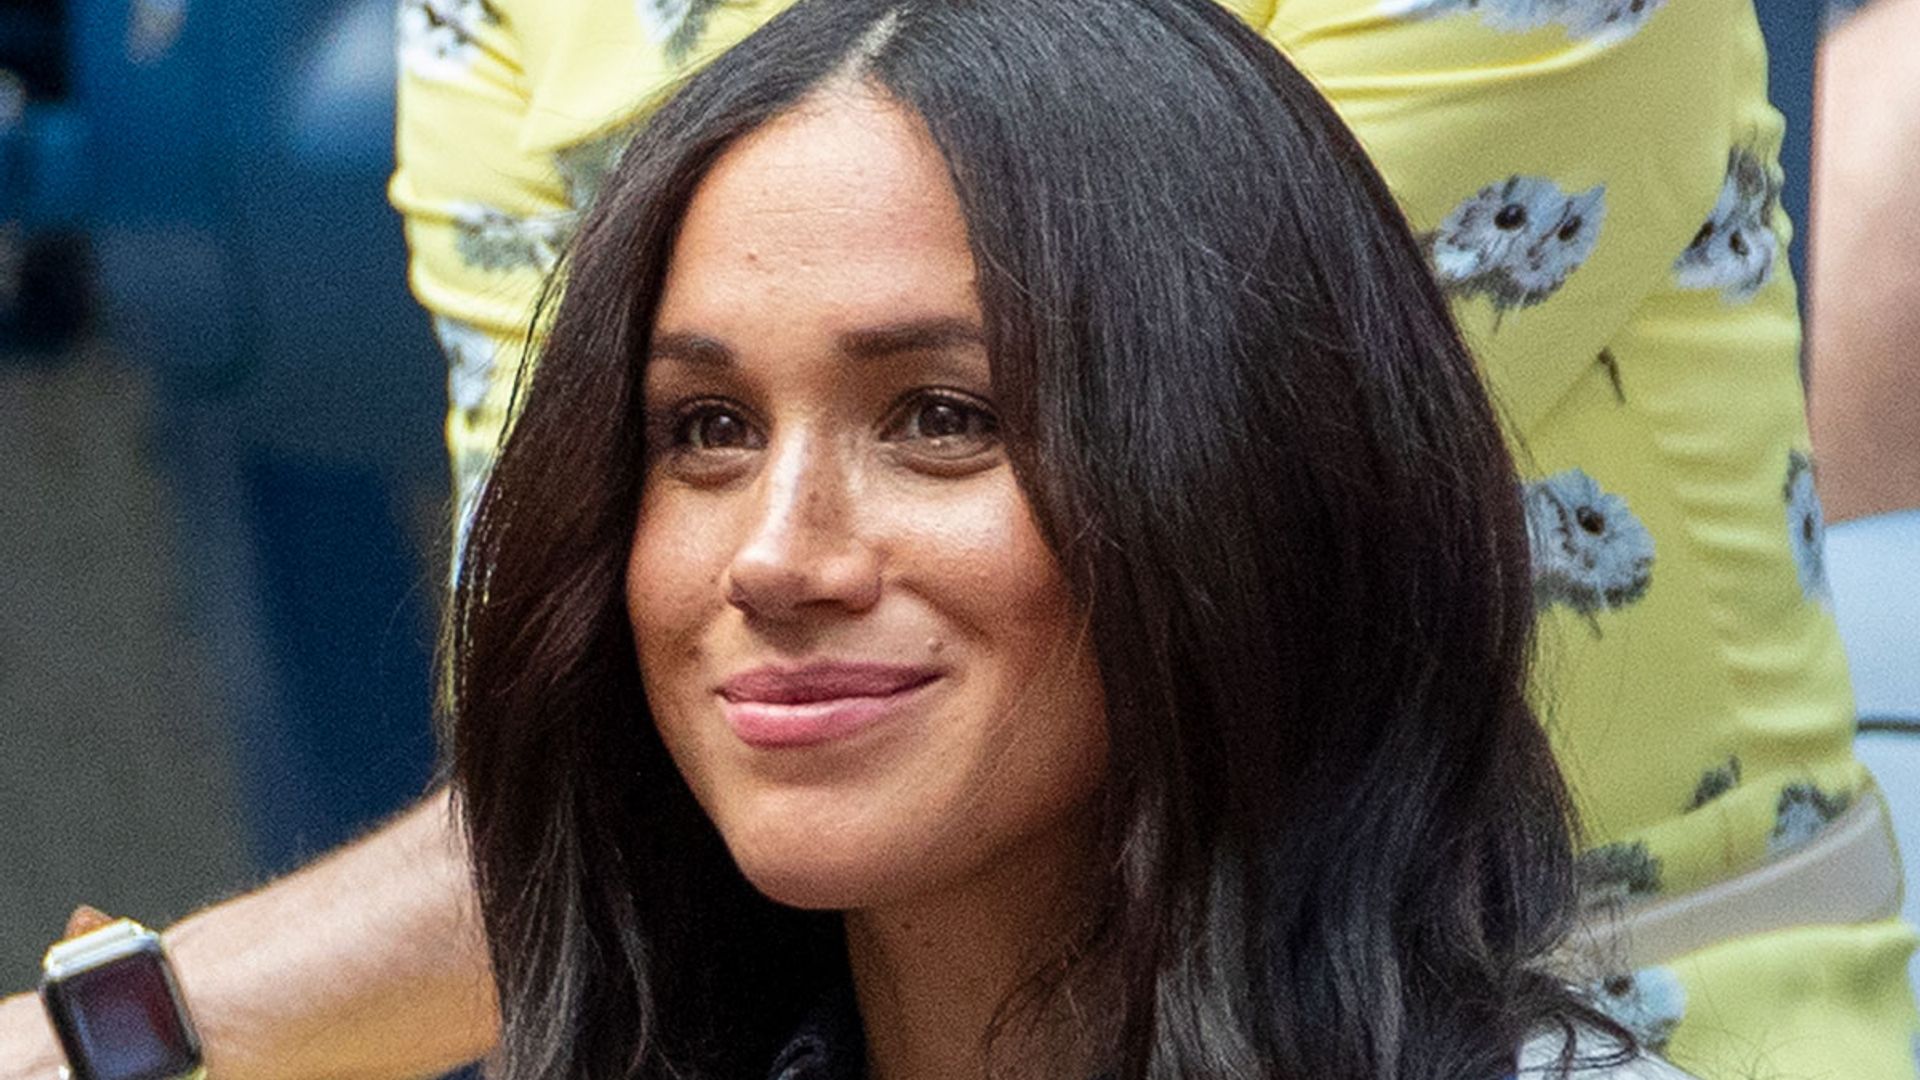 Meghan Markle Made Low-Rise Jeans Look Chic With This Item